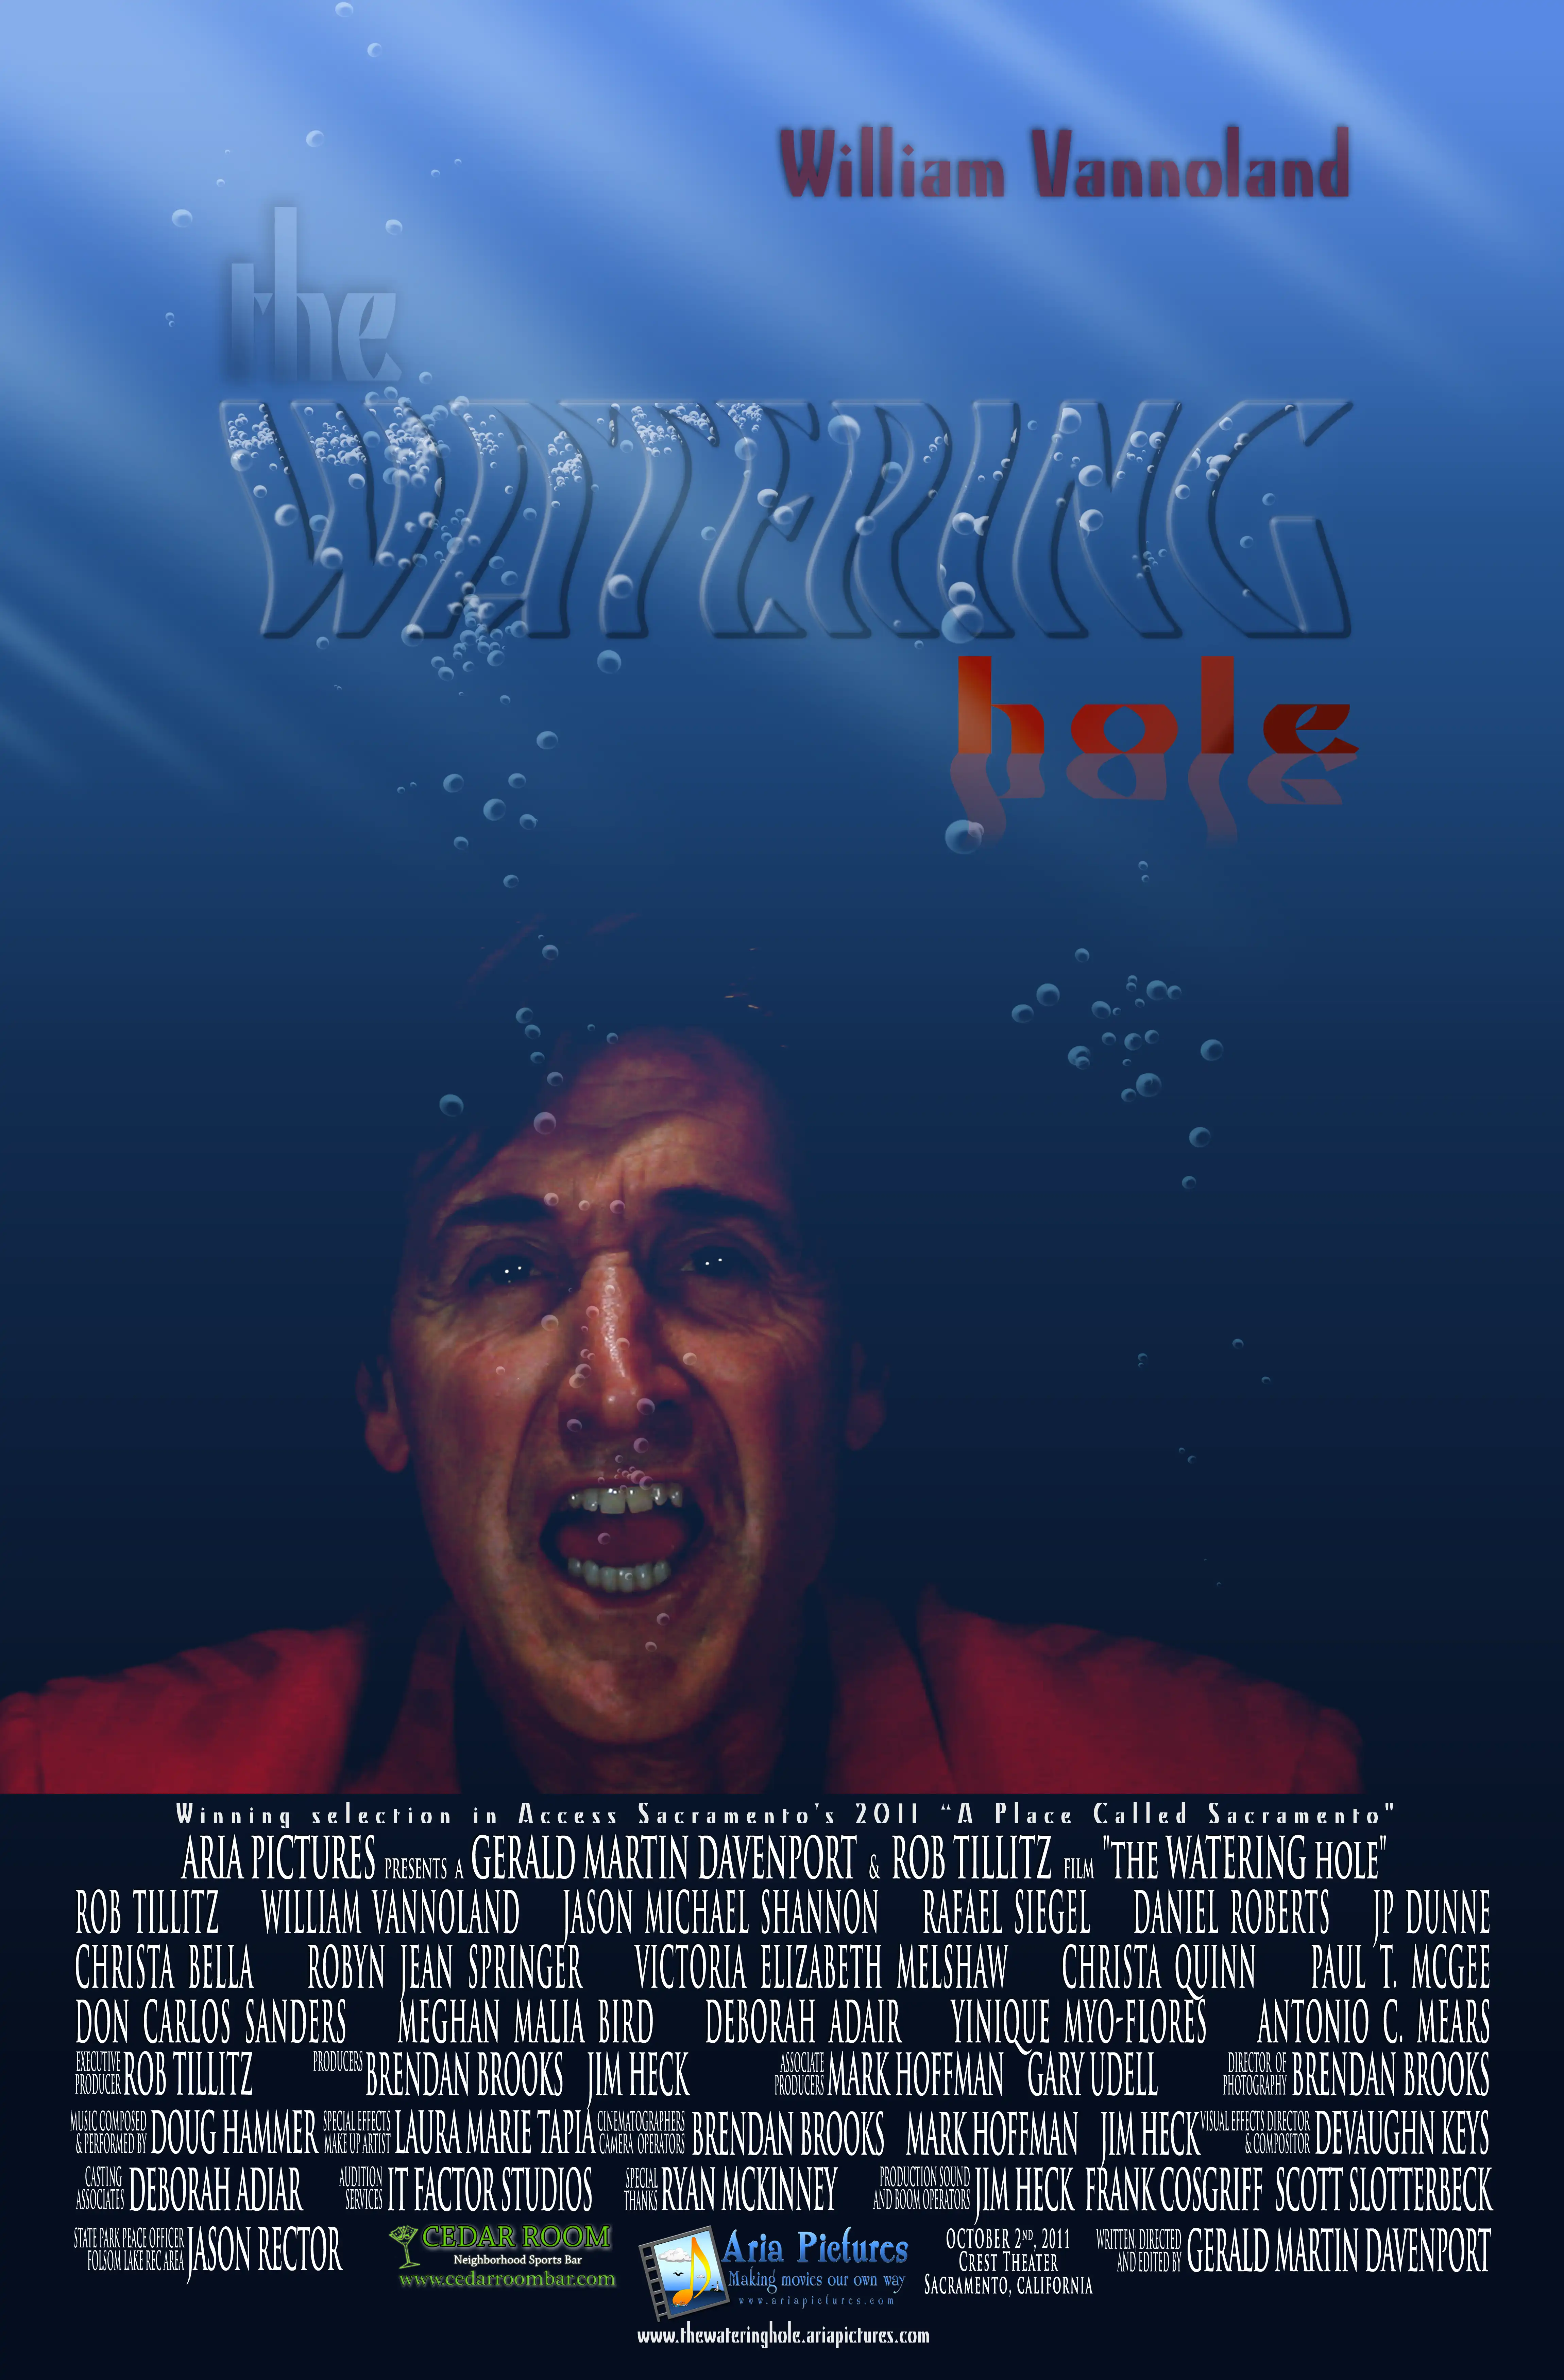 Nicor poster from the WATERING hole (2011).